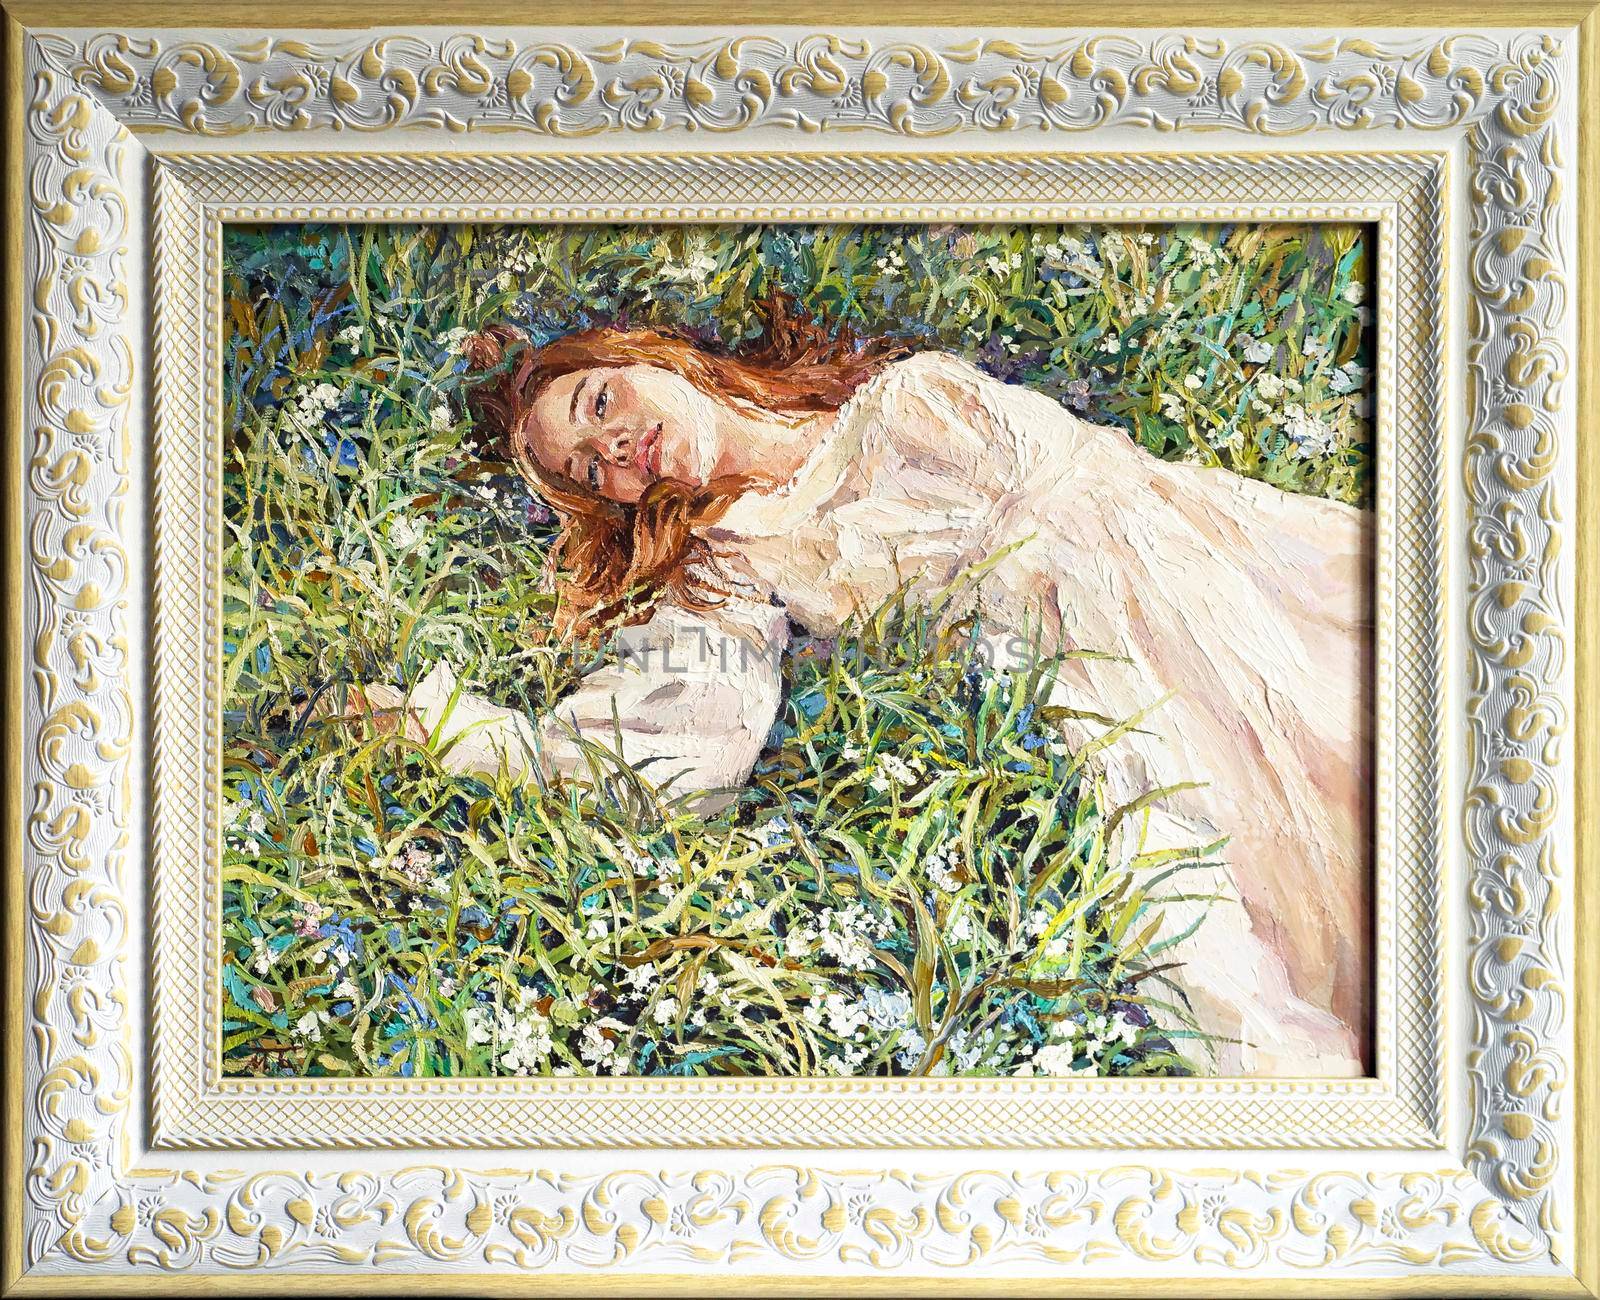 A red-haired beauty, a young girl lies and dreams on the field among various summer grasses and wildflowers. Framed oil painting on canvas.